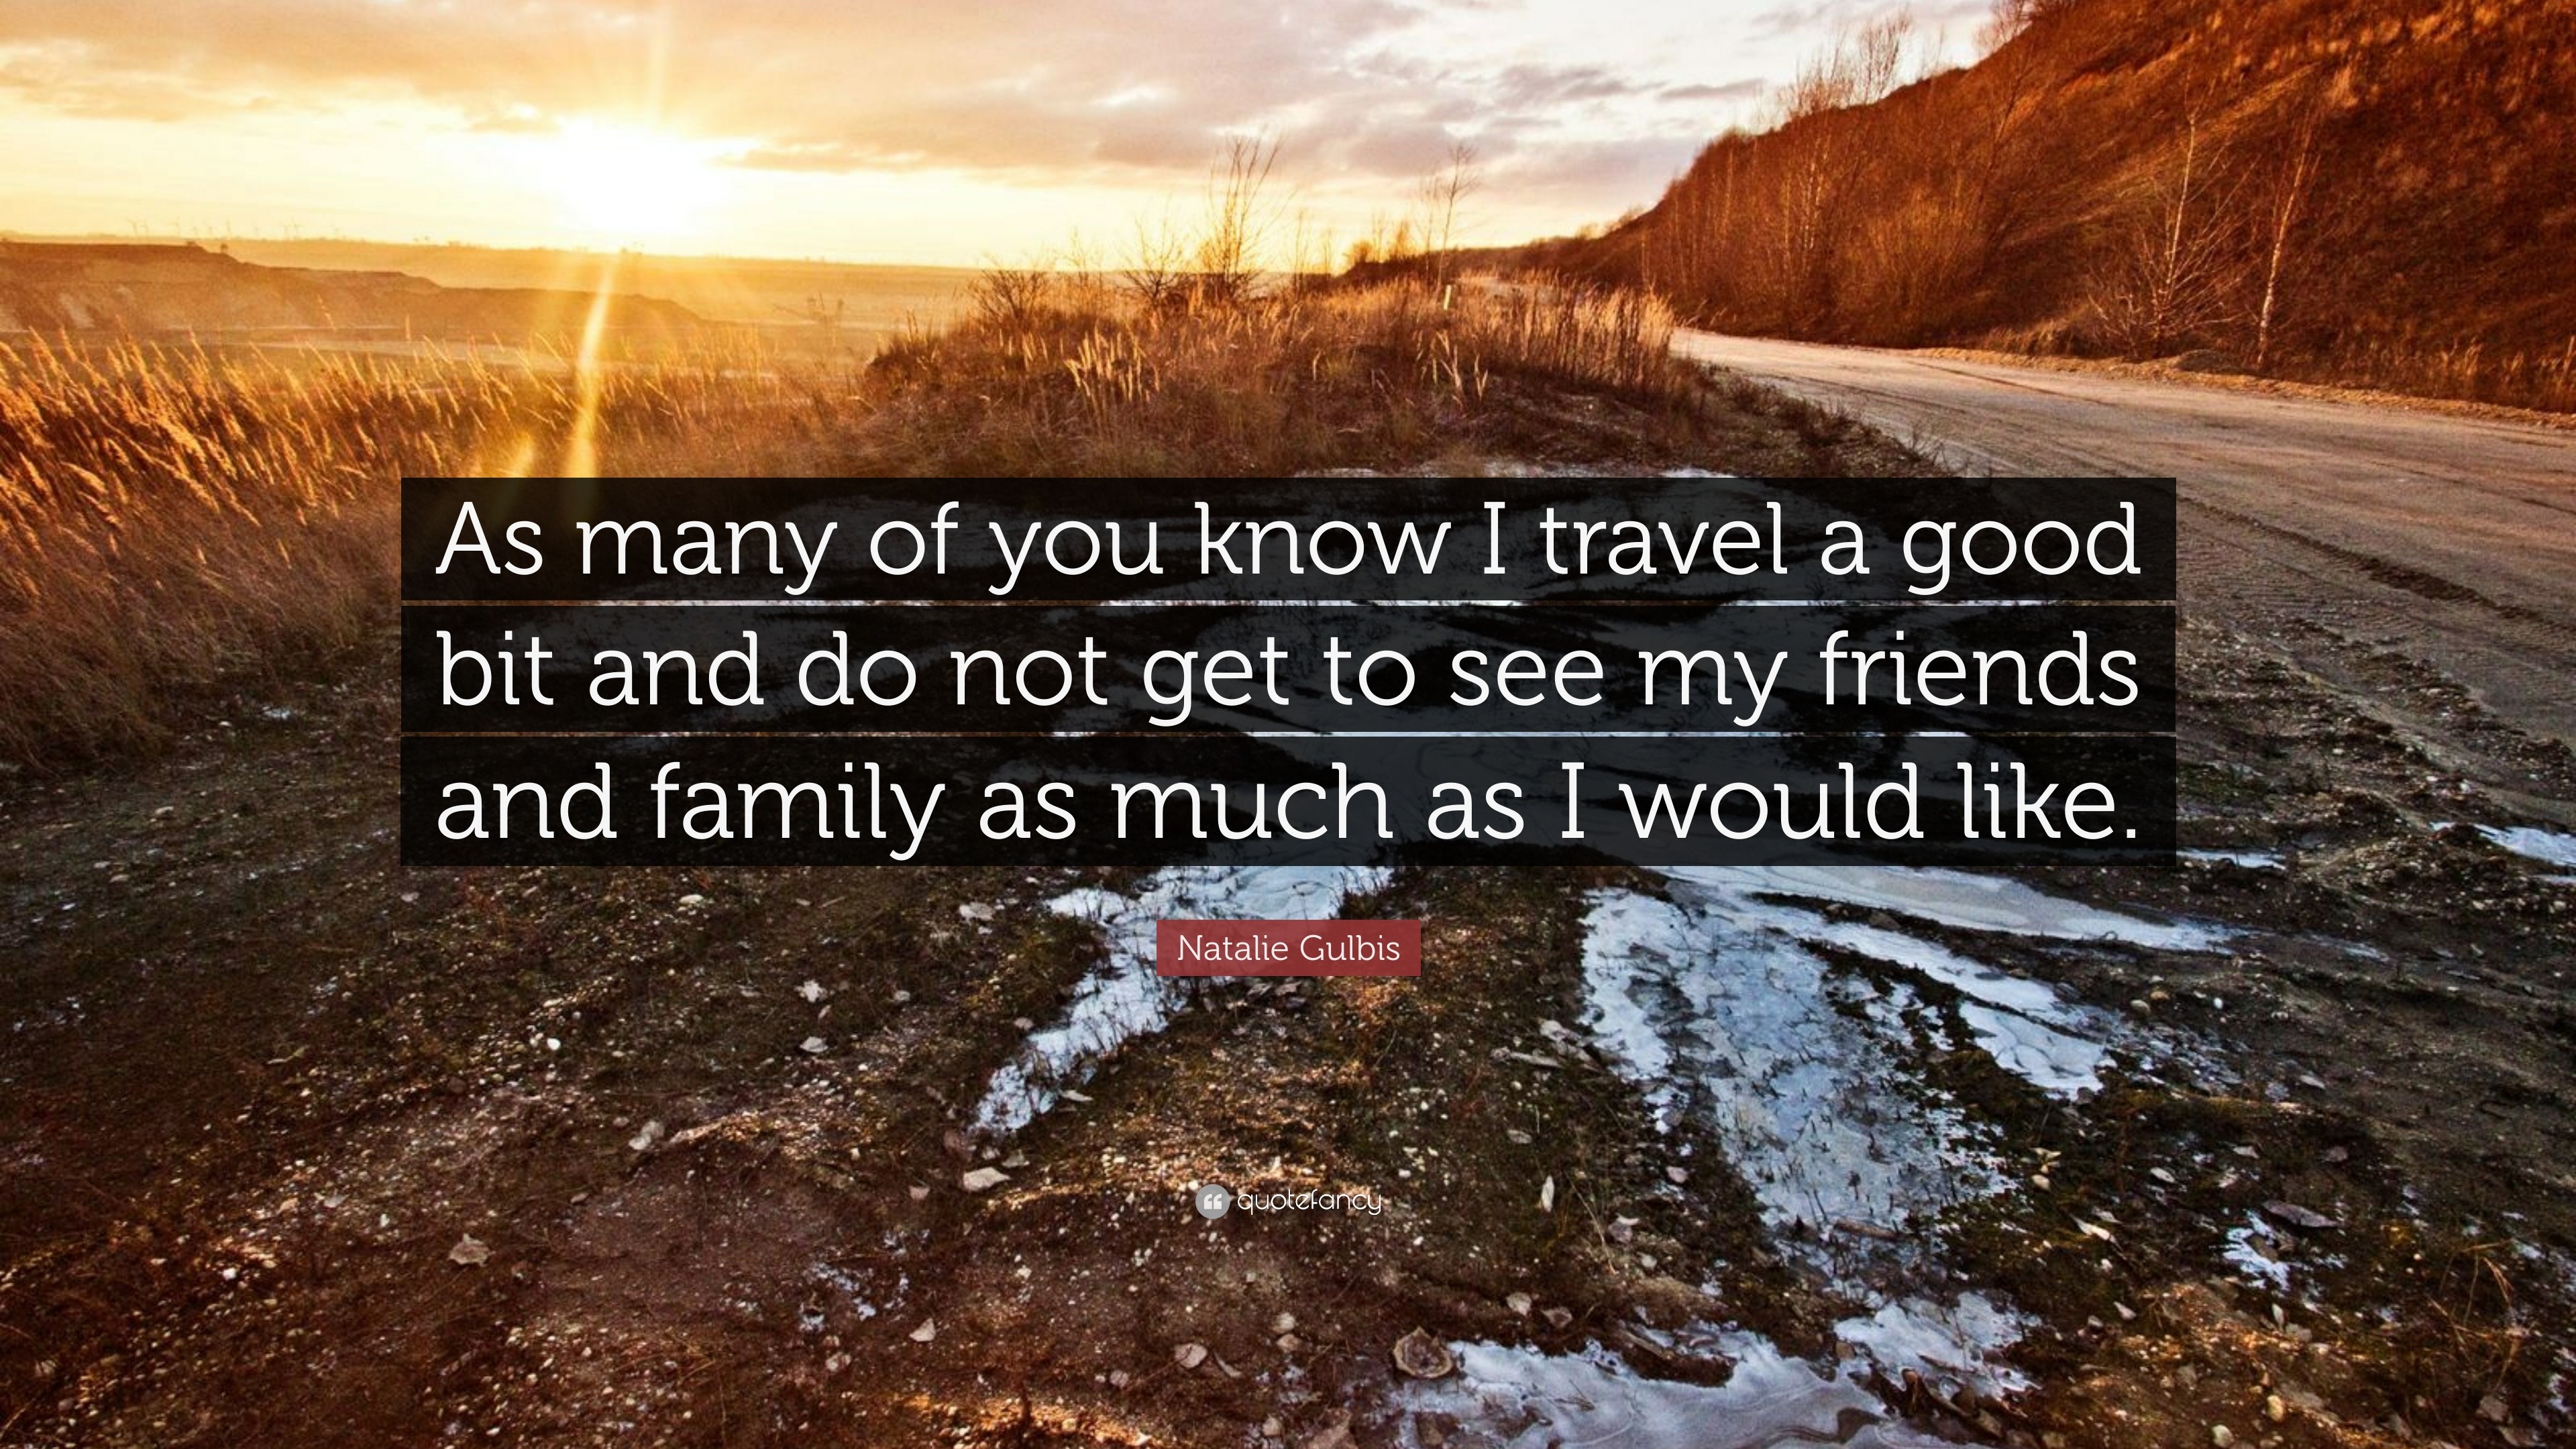 3840x2160 Natalie Gulbis Quote: “As many of you know I travel a good bit and